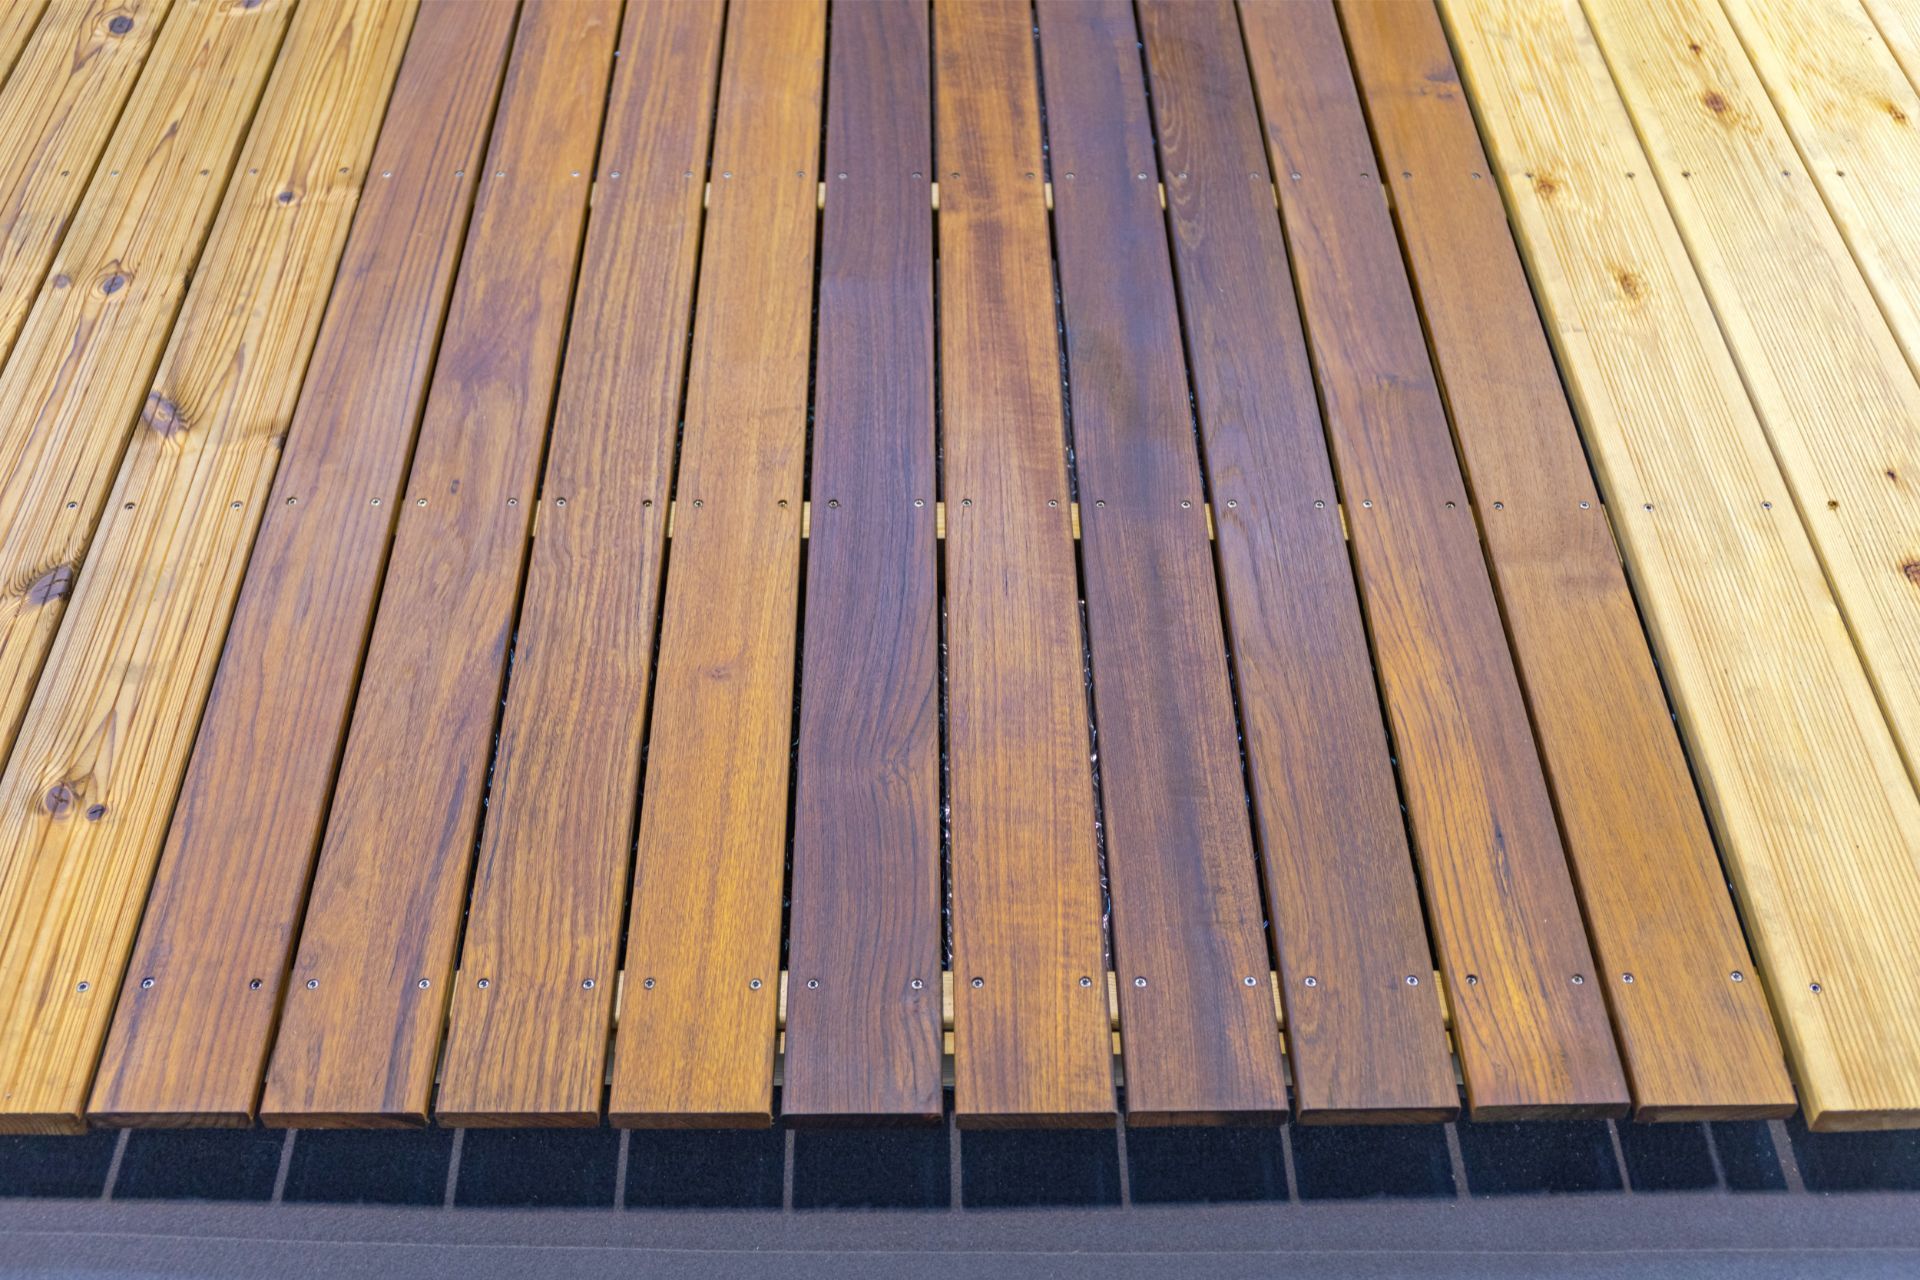 A photo of different types of wooden planks in Athens, GA